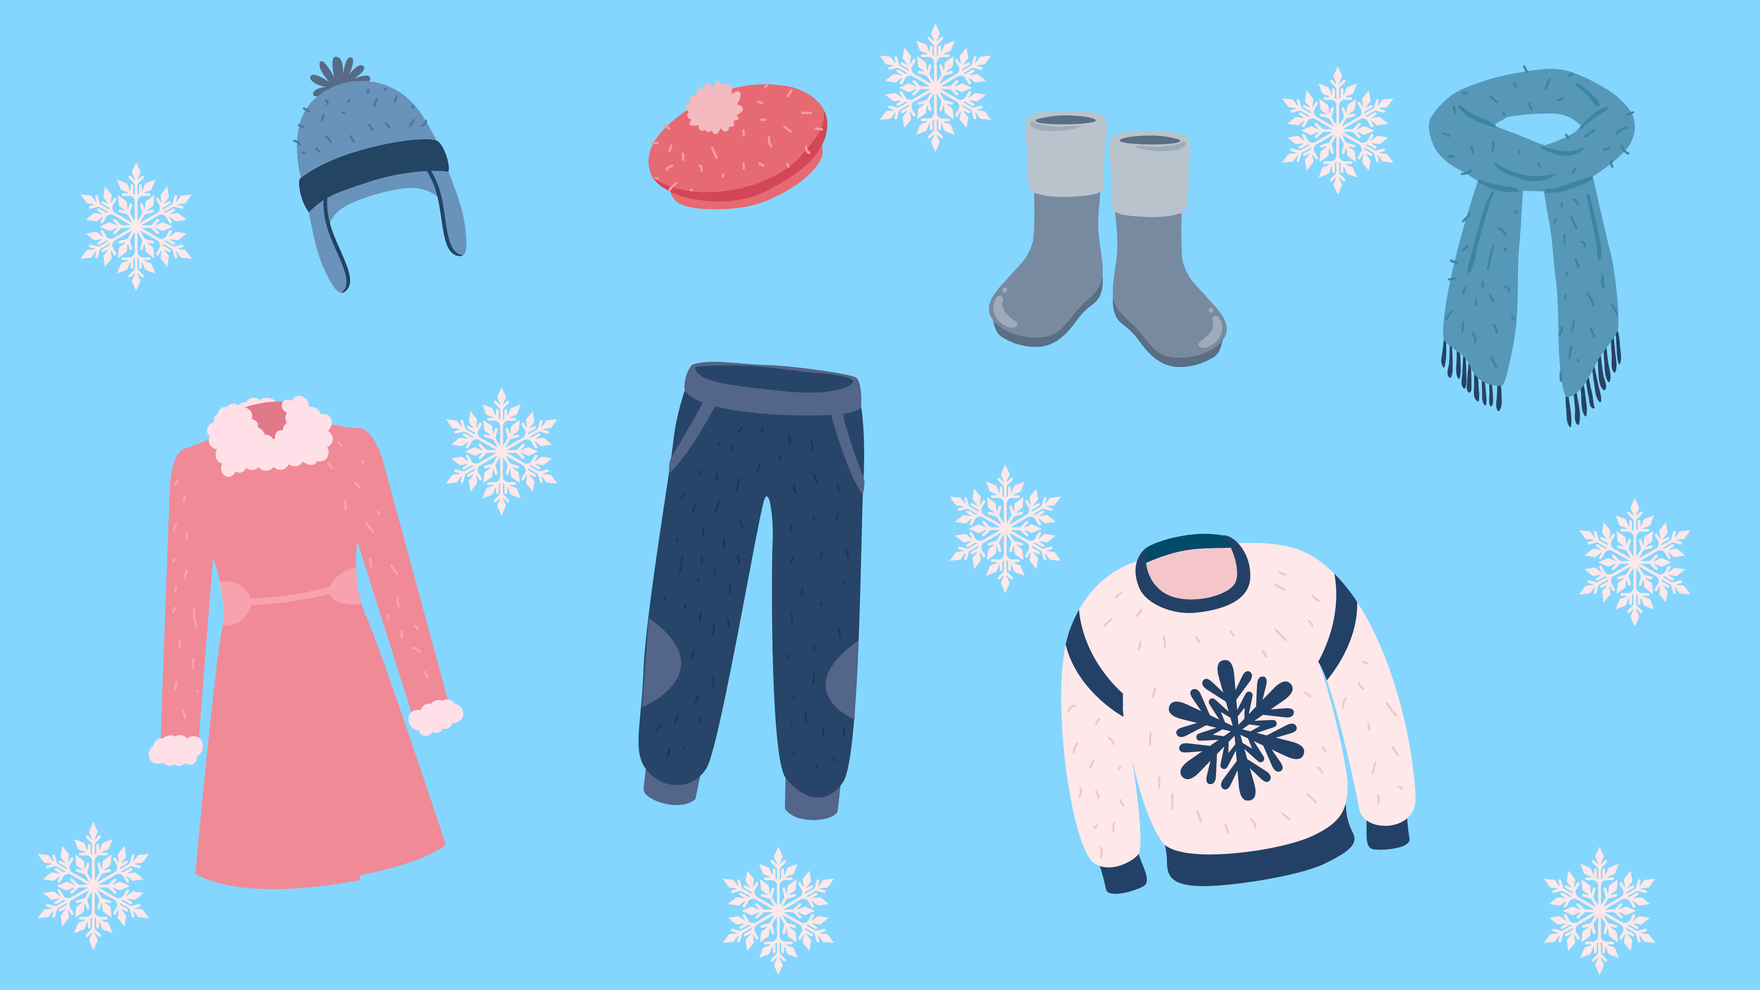 Free Winter Clothes Background in Illustrator, EPS, SVG, JPG, PNG